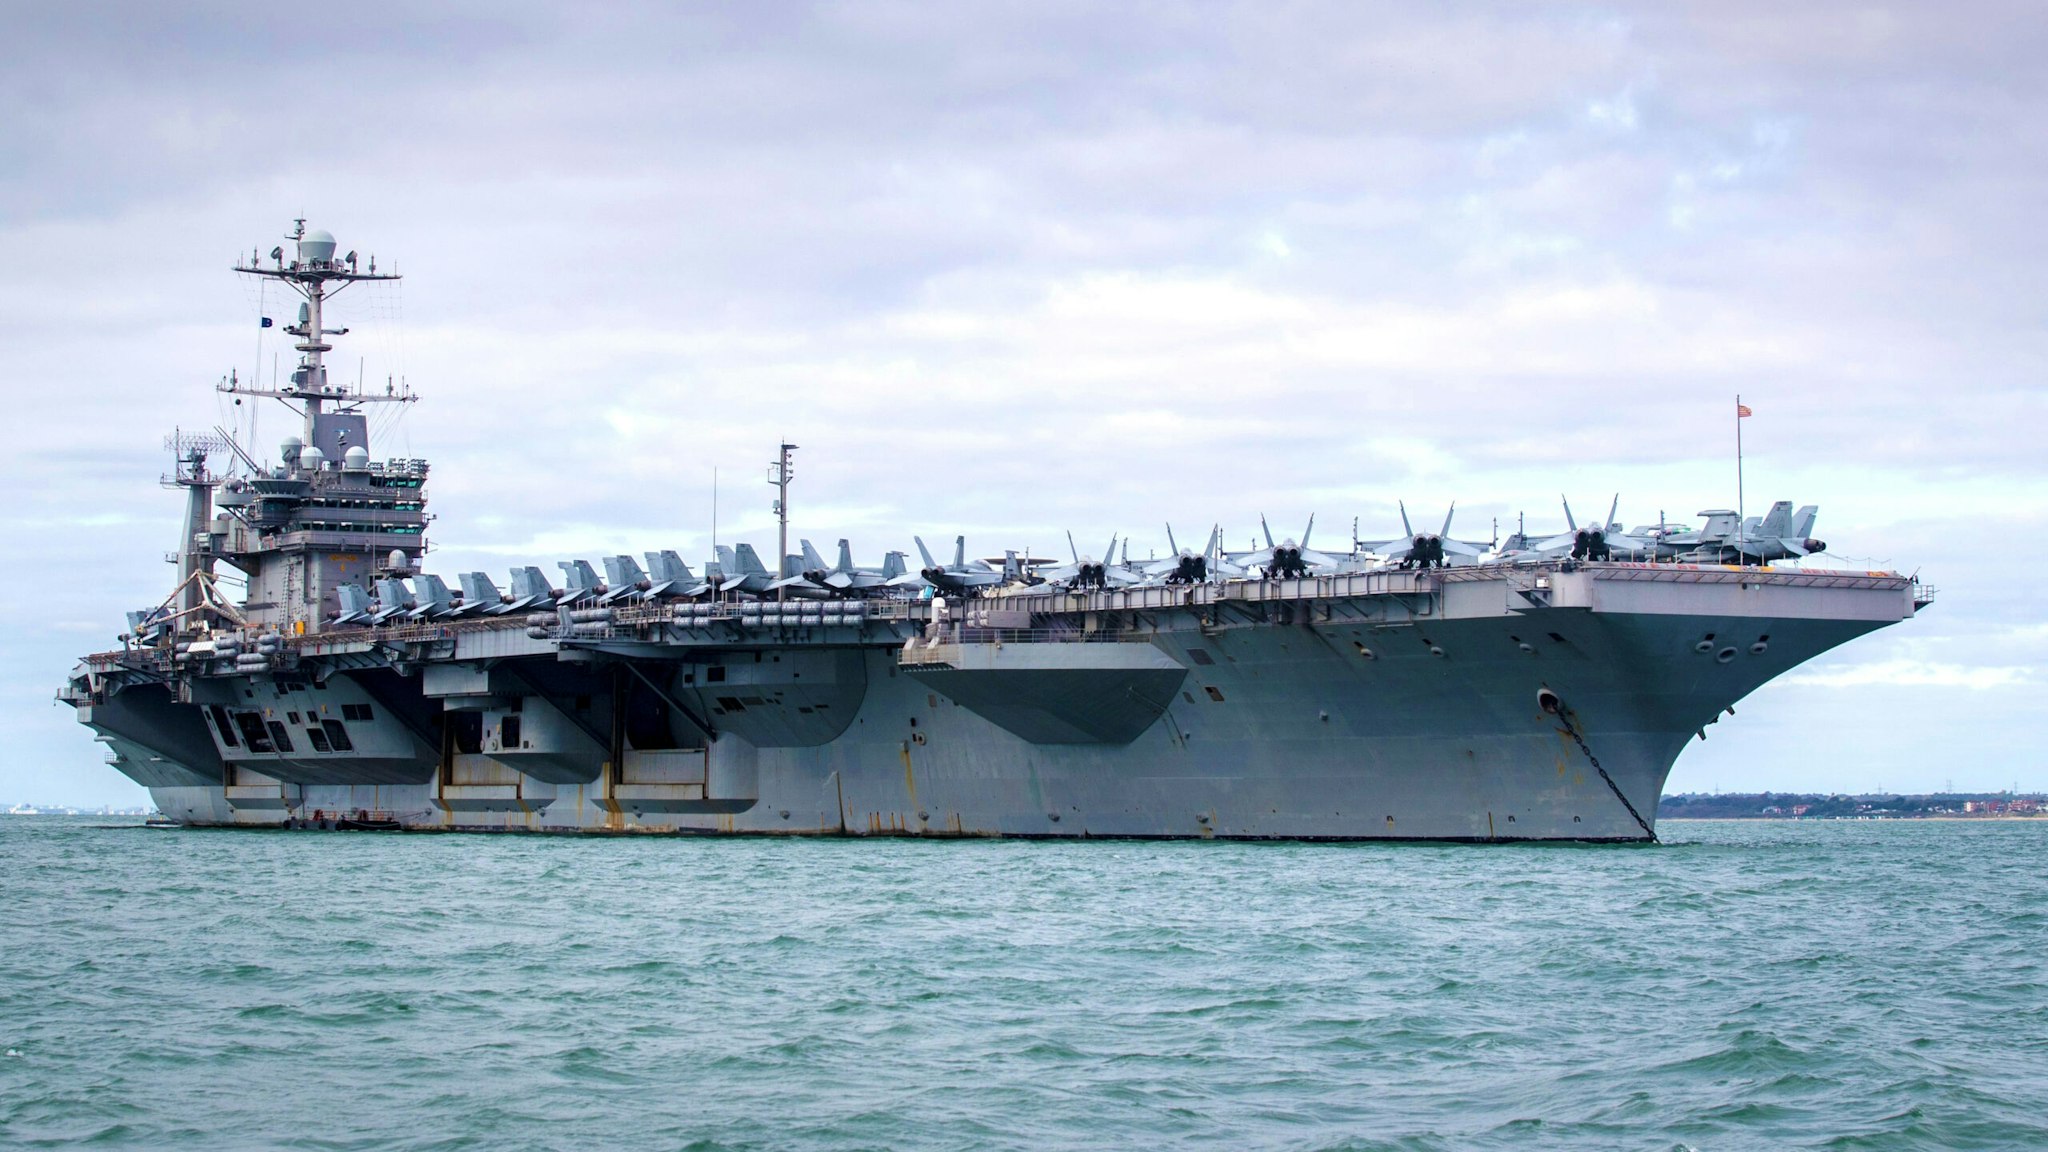 PORTSMOUTH, ENGLAND - OCTOBER 08: The US warship USS Harry S. Truman is pictured anchored in The Solent on October 8, 2018 near Portsmouth, England. The nuclear powered aircraft carrier, named after the 33rd President of the United States with a crew of more than 5,000, has been at sea since late August and has been on operations in the North Atlantic, Mediterranean and Arabian Gulf. The Nimitz-class ship, launched in 1998 and carries more than 70 helicopters and fixed-wing aircraft, arrived in The Solent on Saturday for a five-day stay.